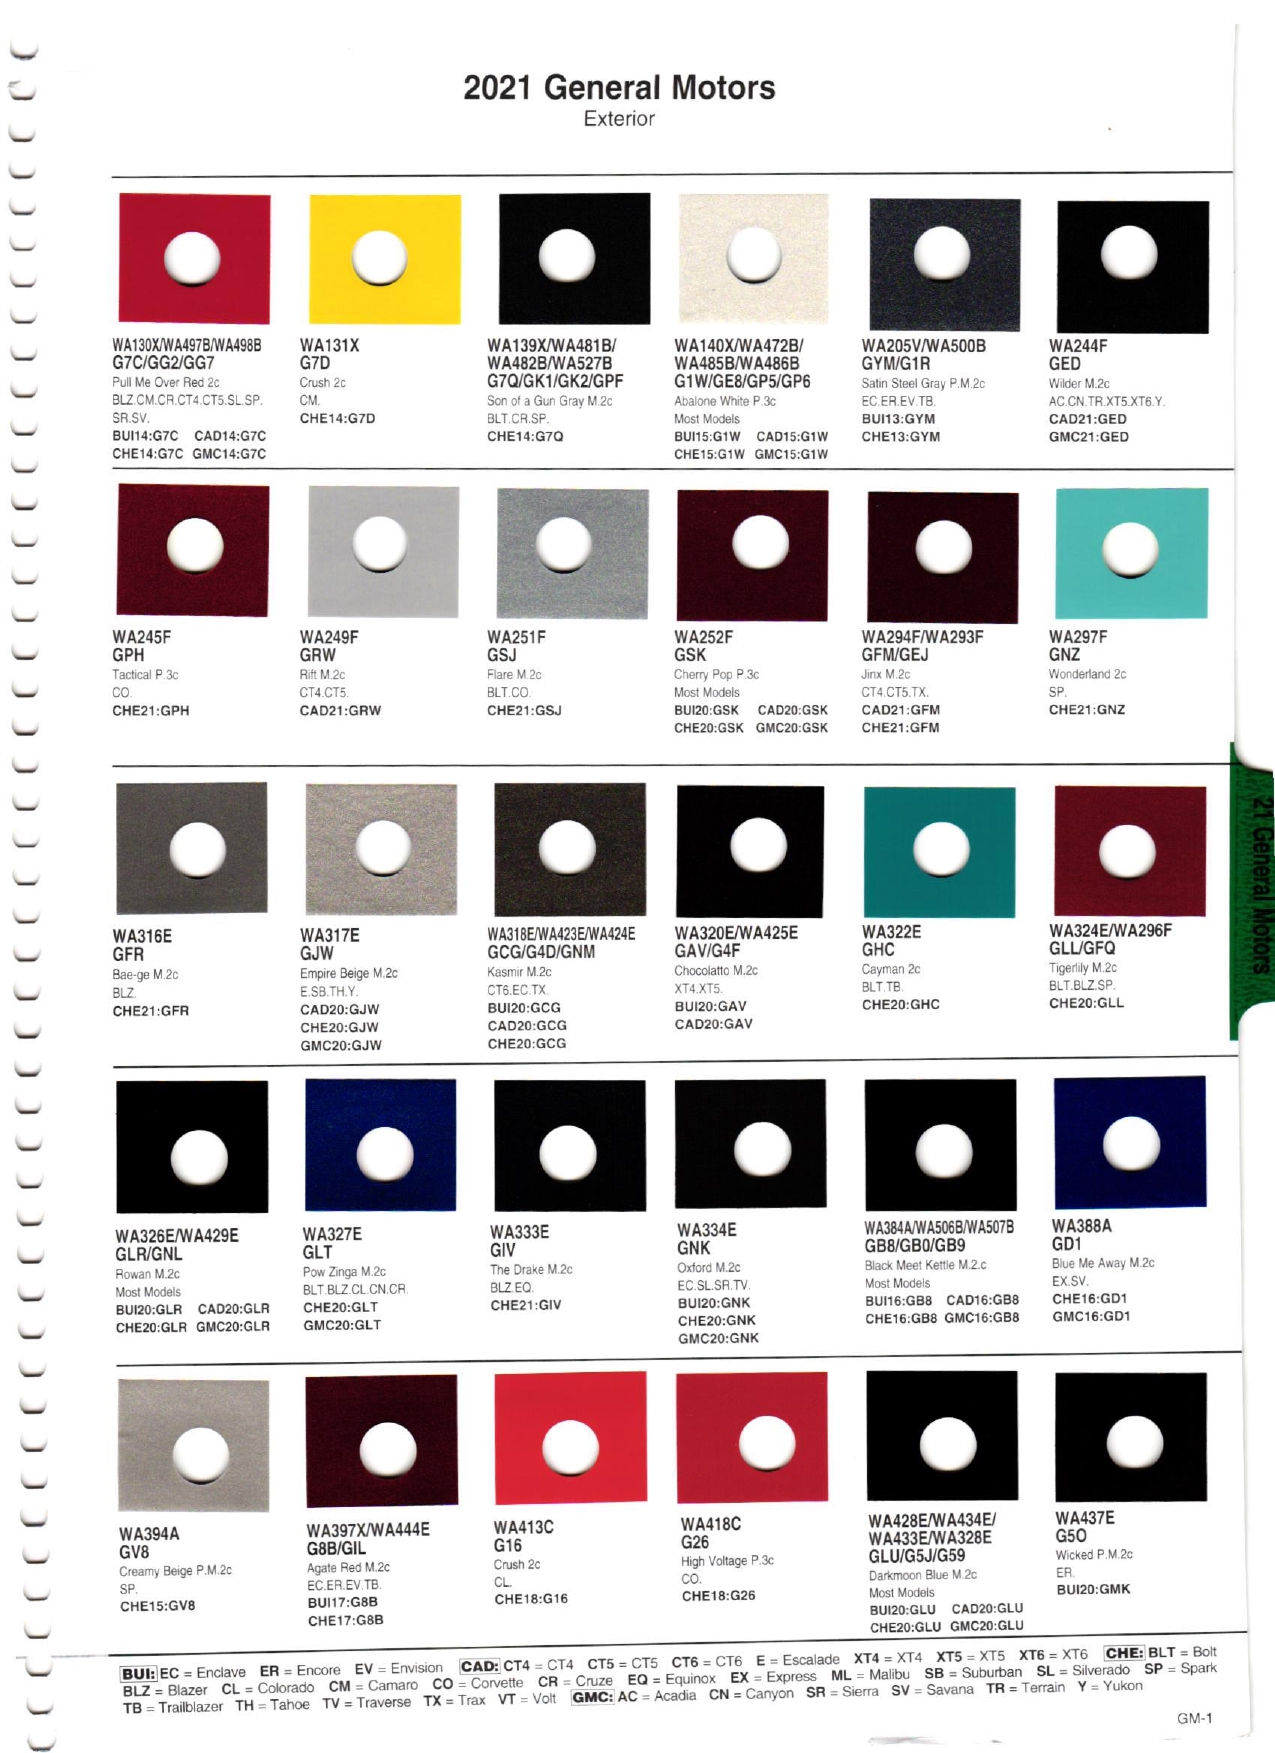 Paint Colors for Chevrolet, Buick, Cadillac, and GMC paint codes 